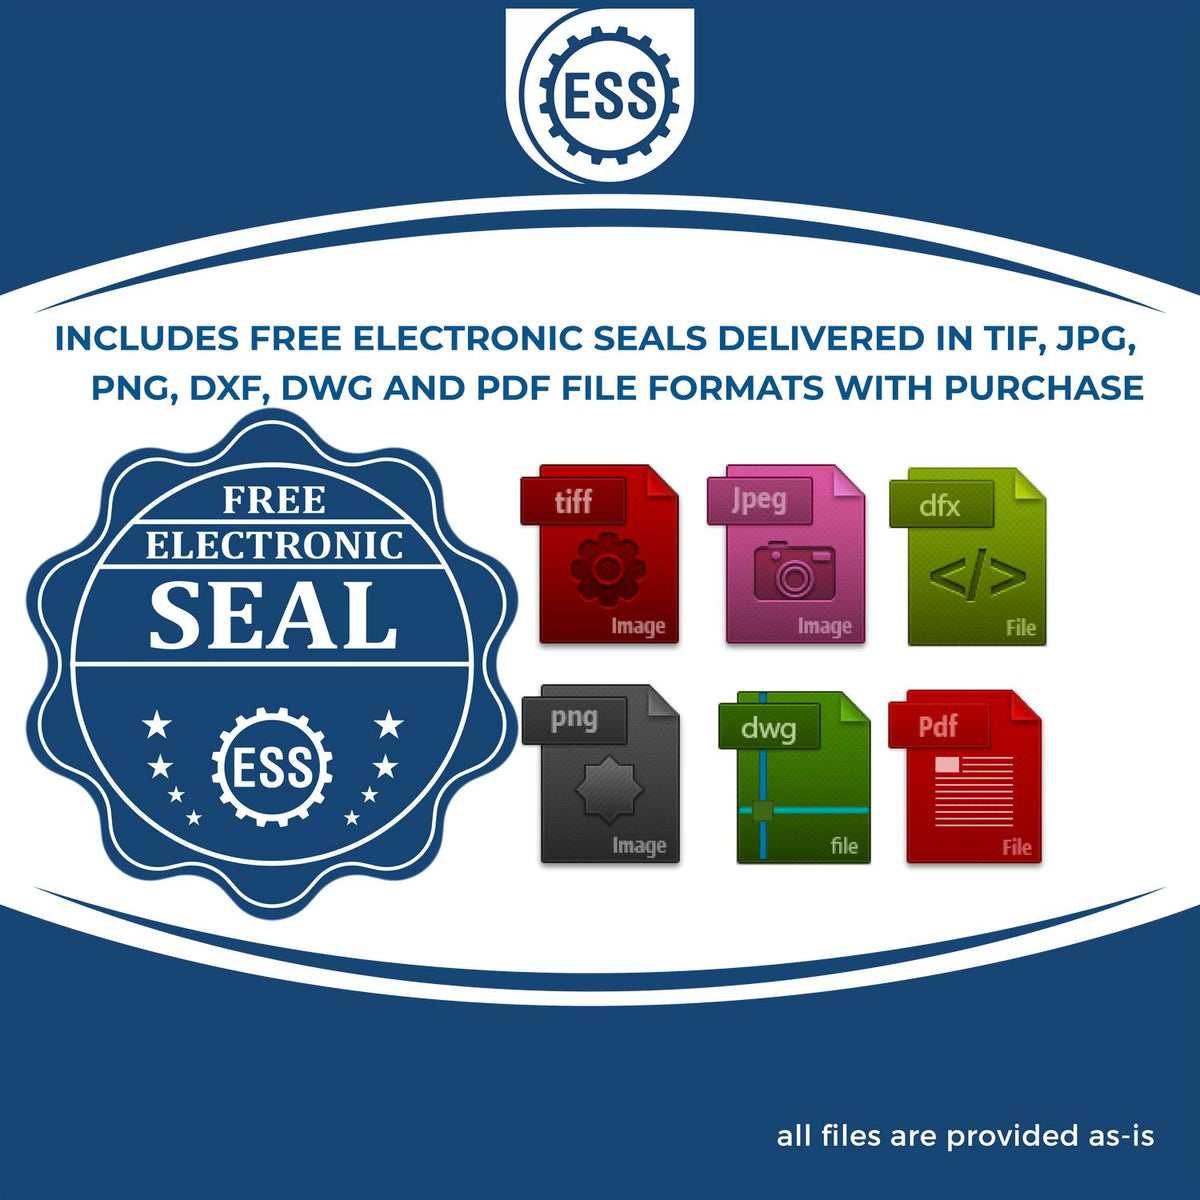 An infographic for the free electronic seal for the Soft Illinois Professional Geologist Seal illustrating the different file type icons such as DXF, DWG, TIF, JPG and PNG.